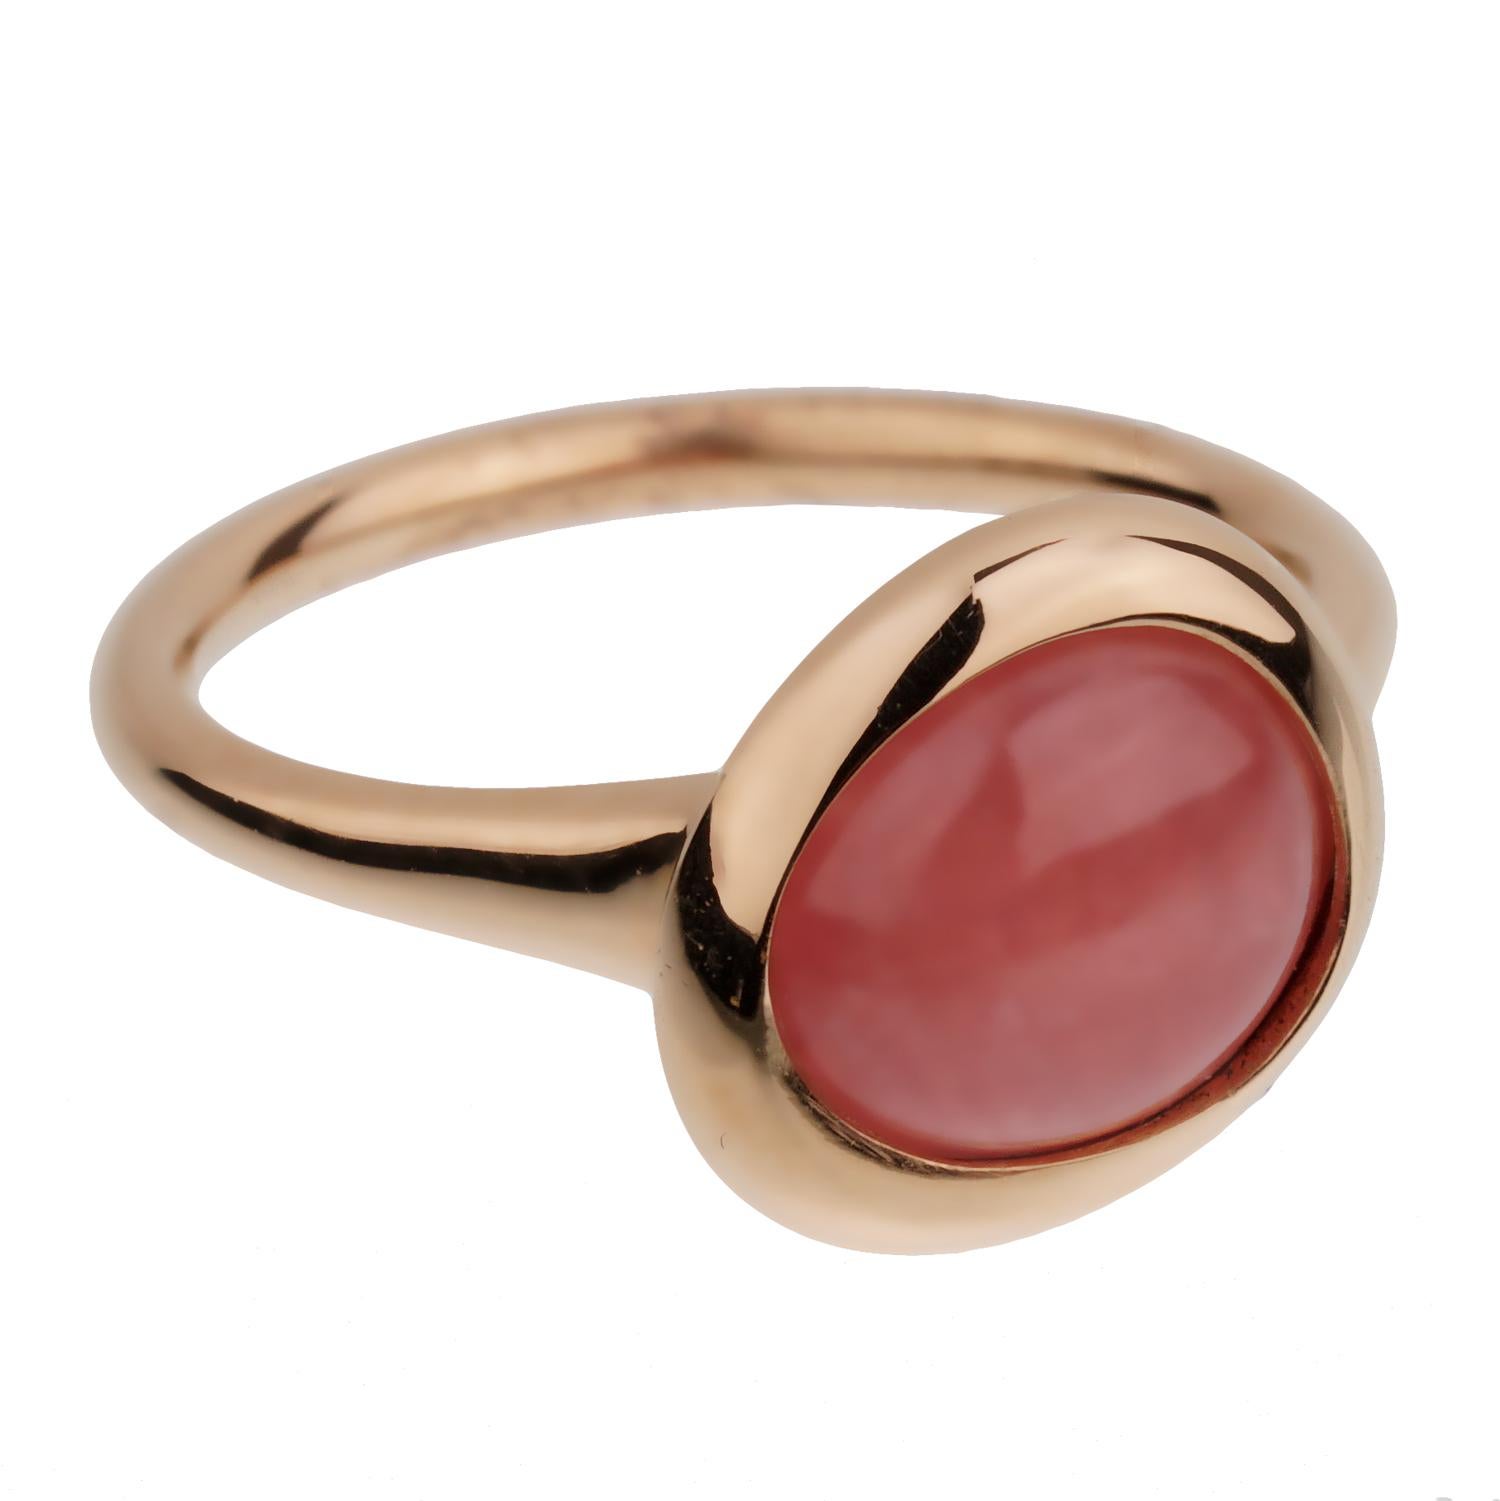 A chic Fred of Paris rose gold cocktail ring showcasing a 3ct cabochon Pink Quartz set in 18k gold. The ring measures a size 5 and can be resized if needed.